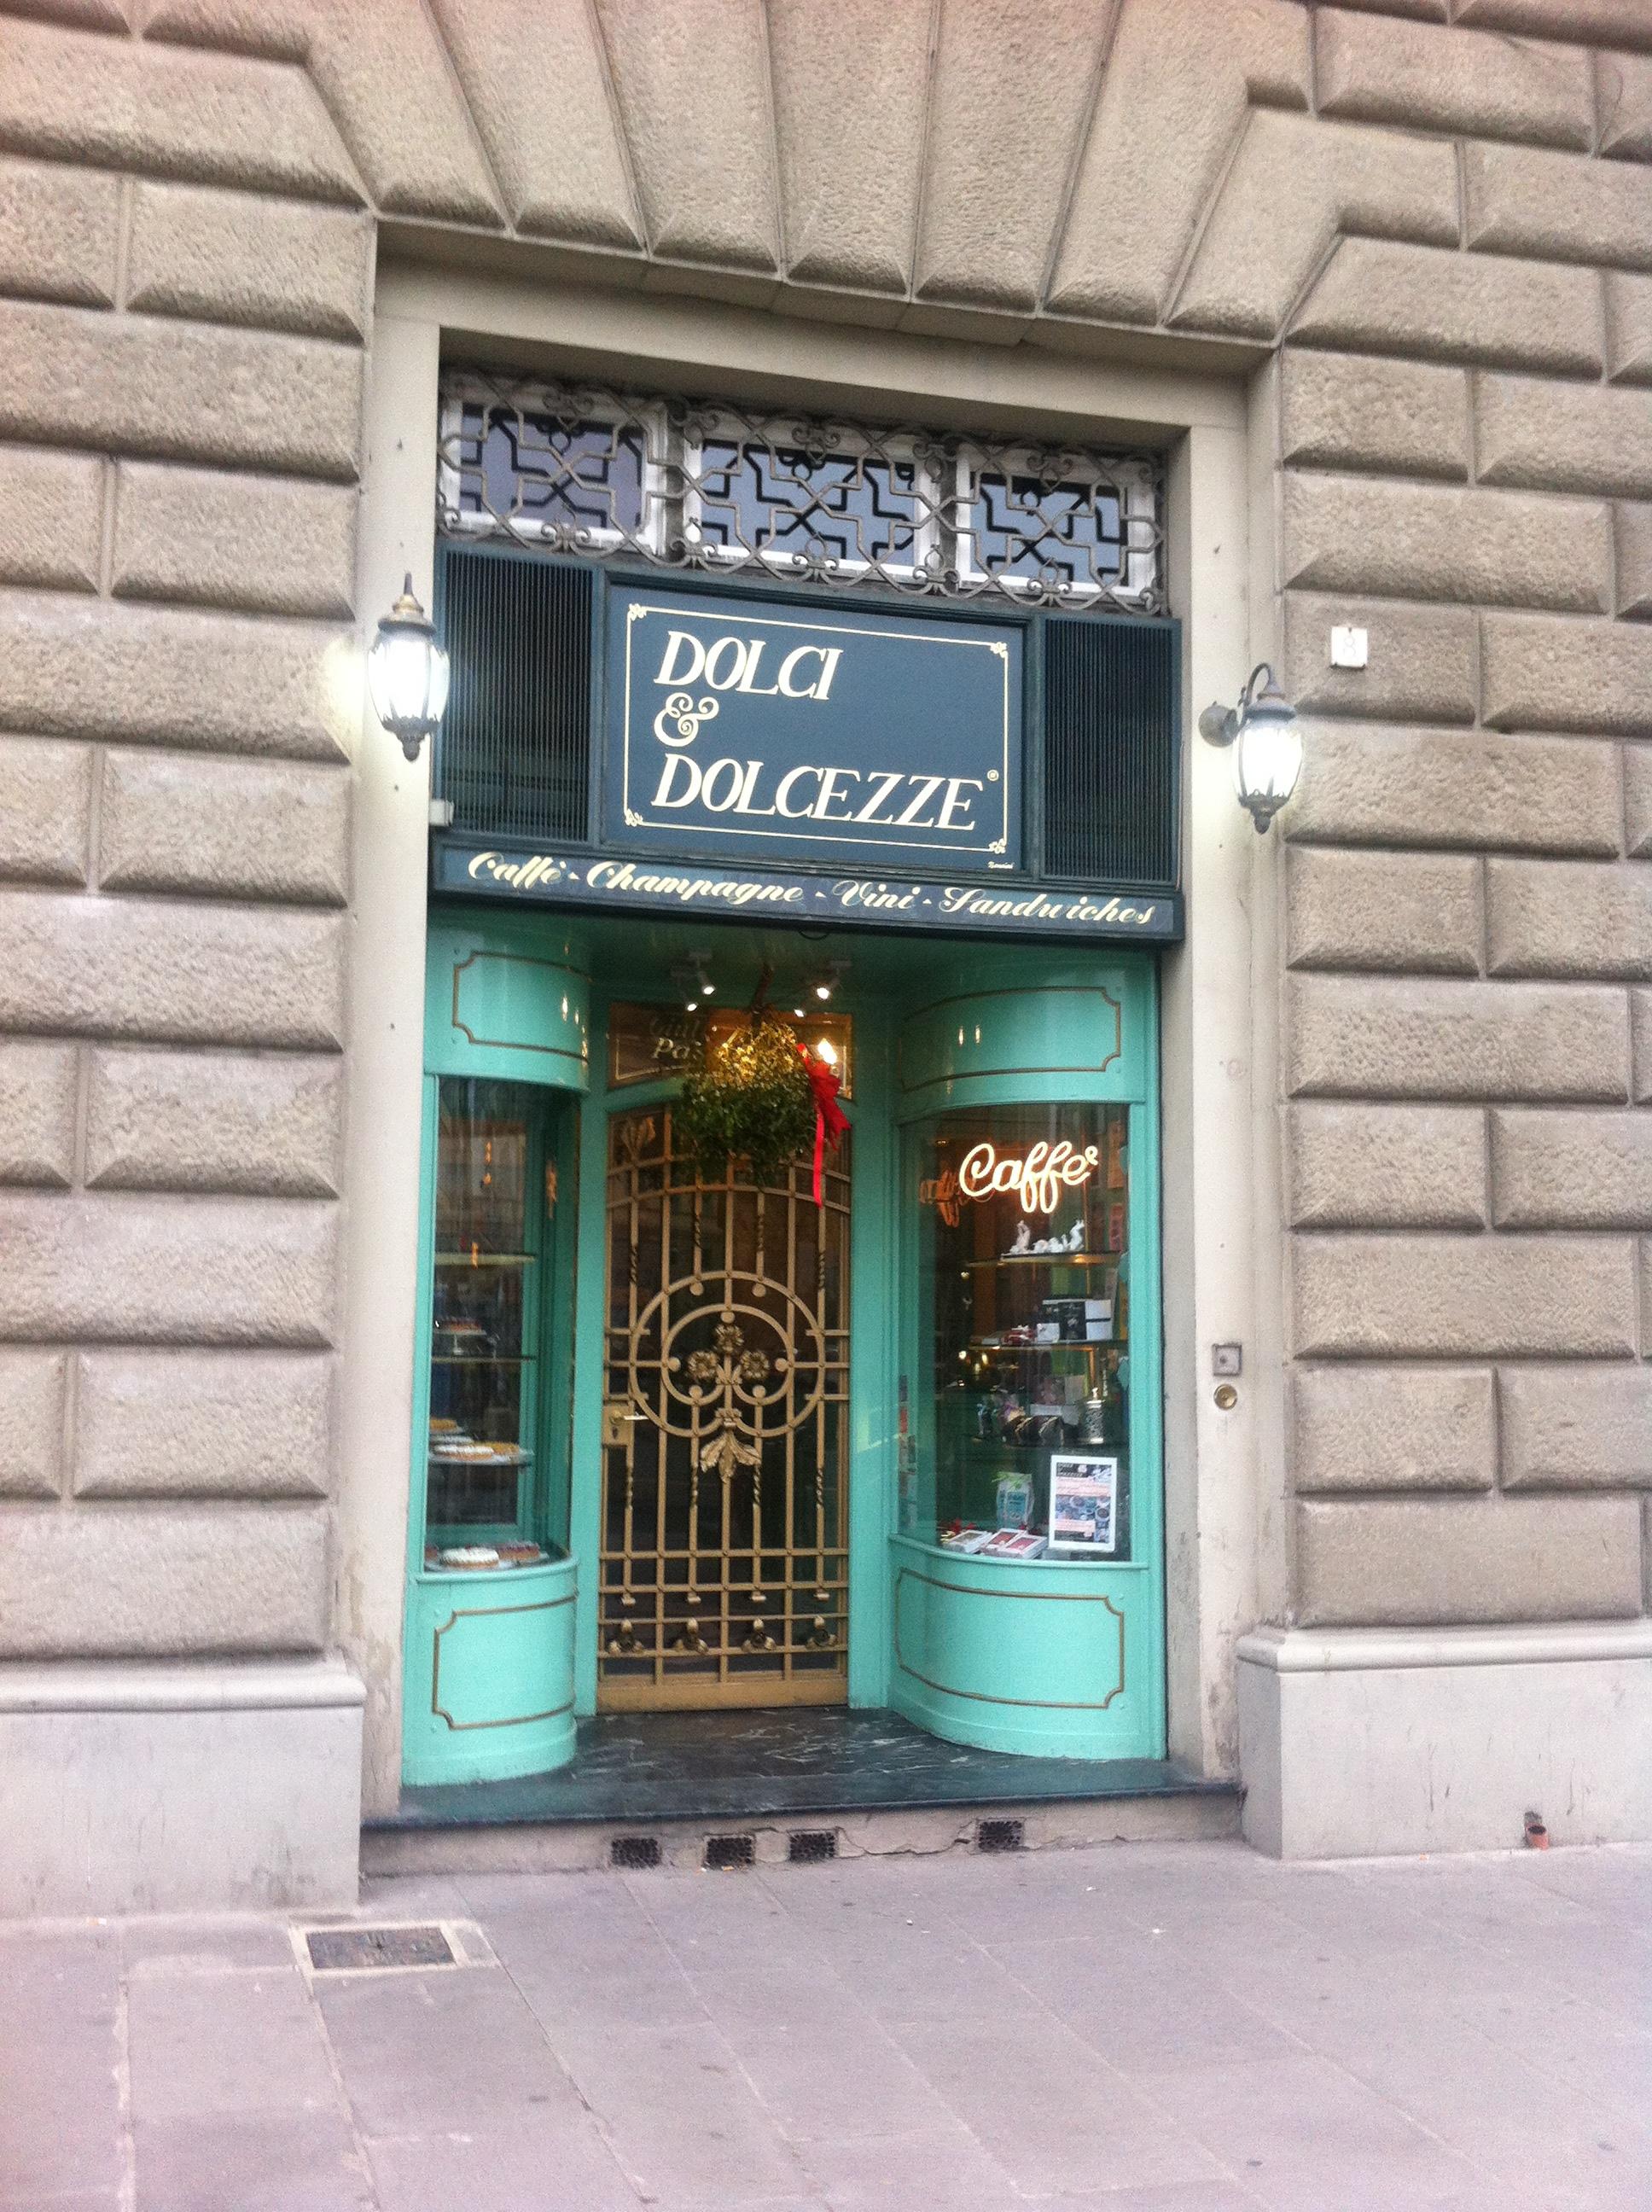 Cover image of this place Dolci e Dolcezze